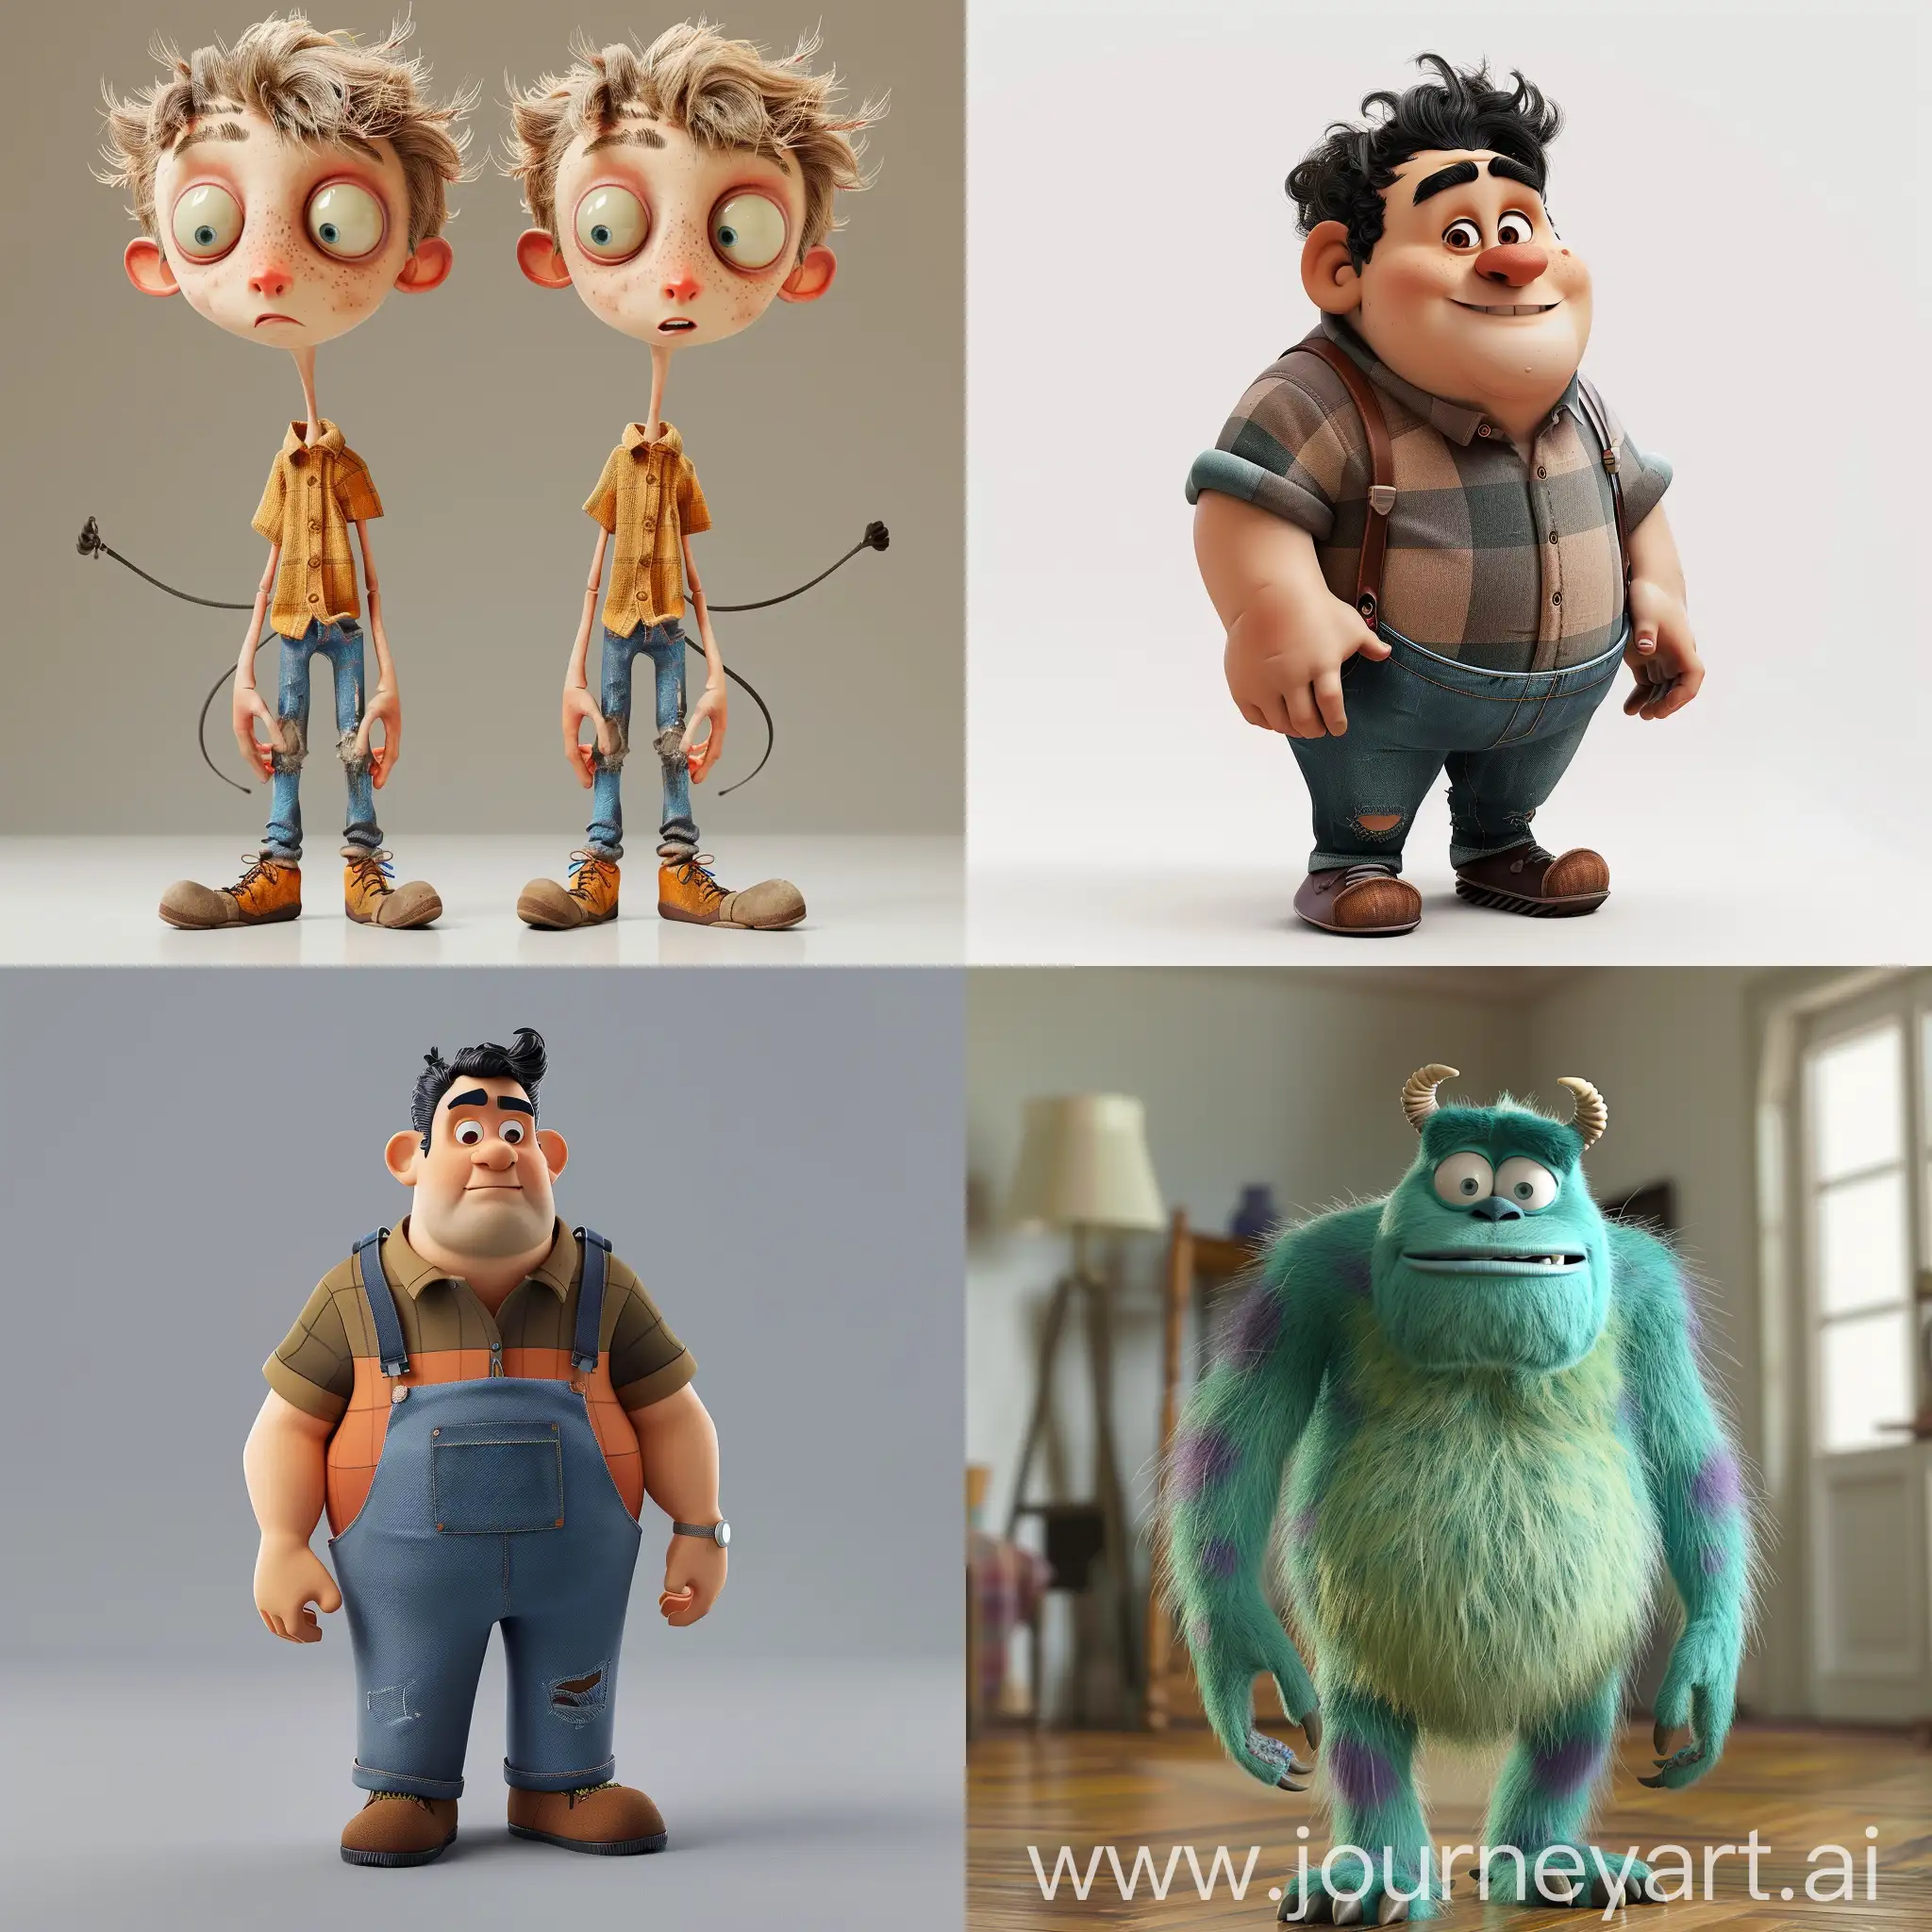 Pixar-Style-Character-with-Vibrant-Colors-and-Playful-Expression